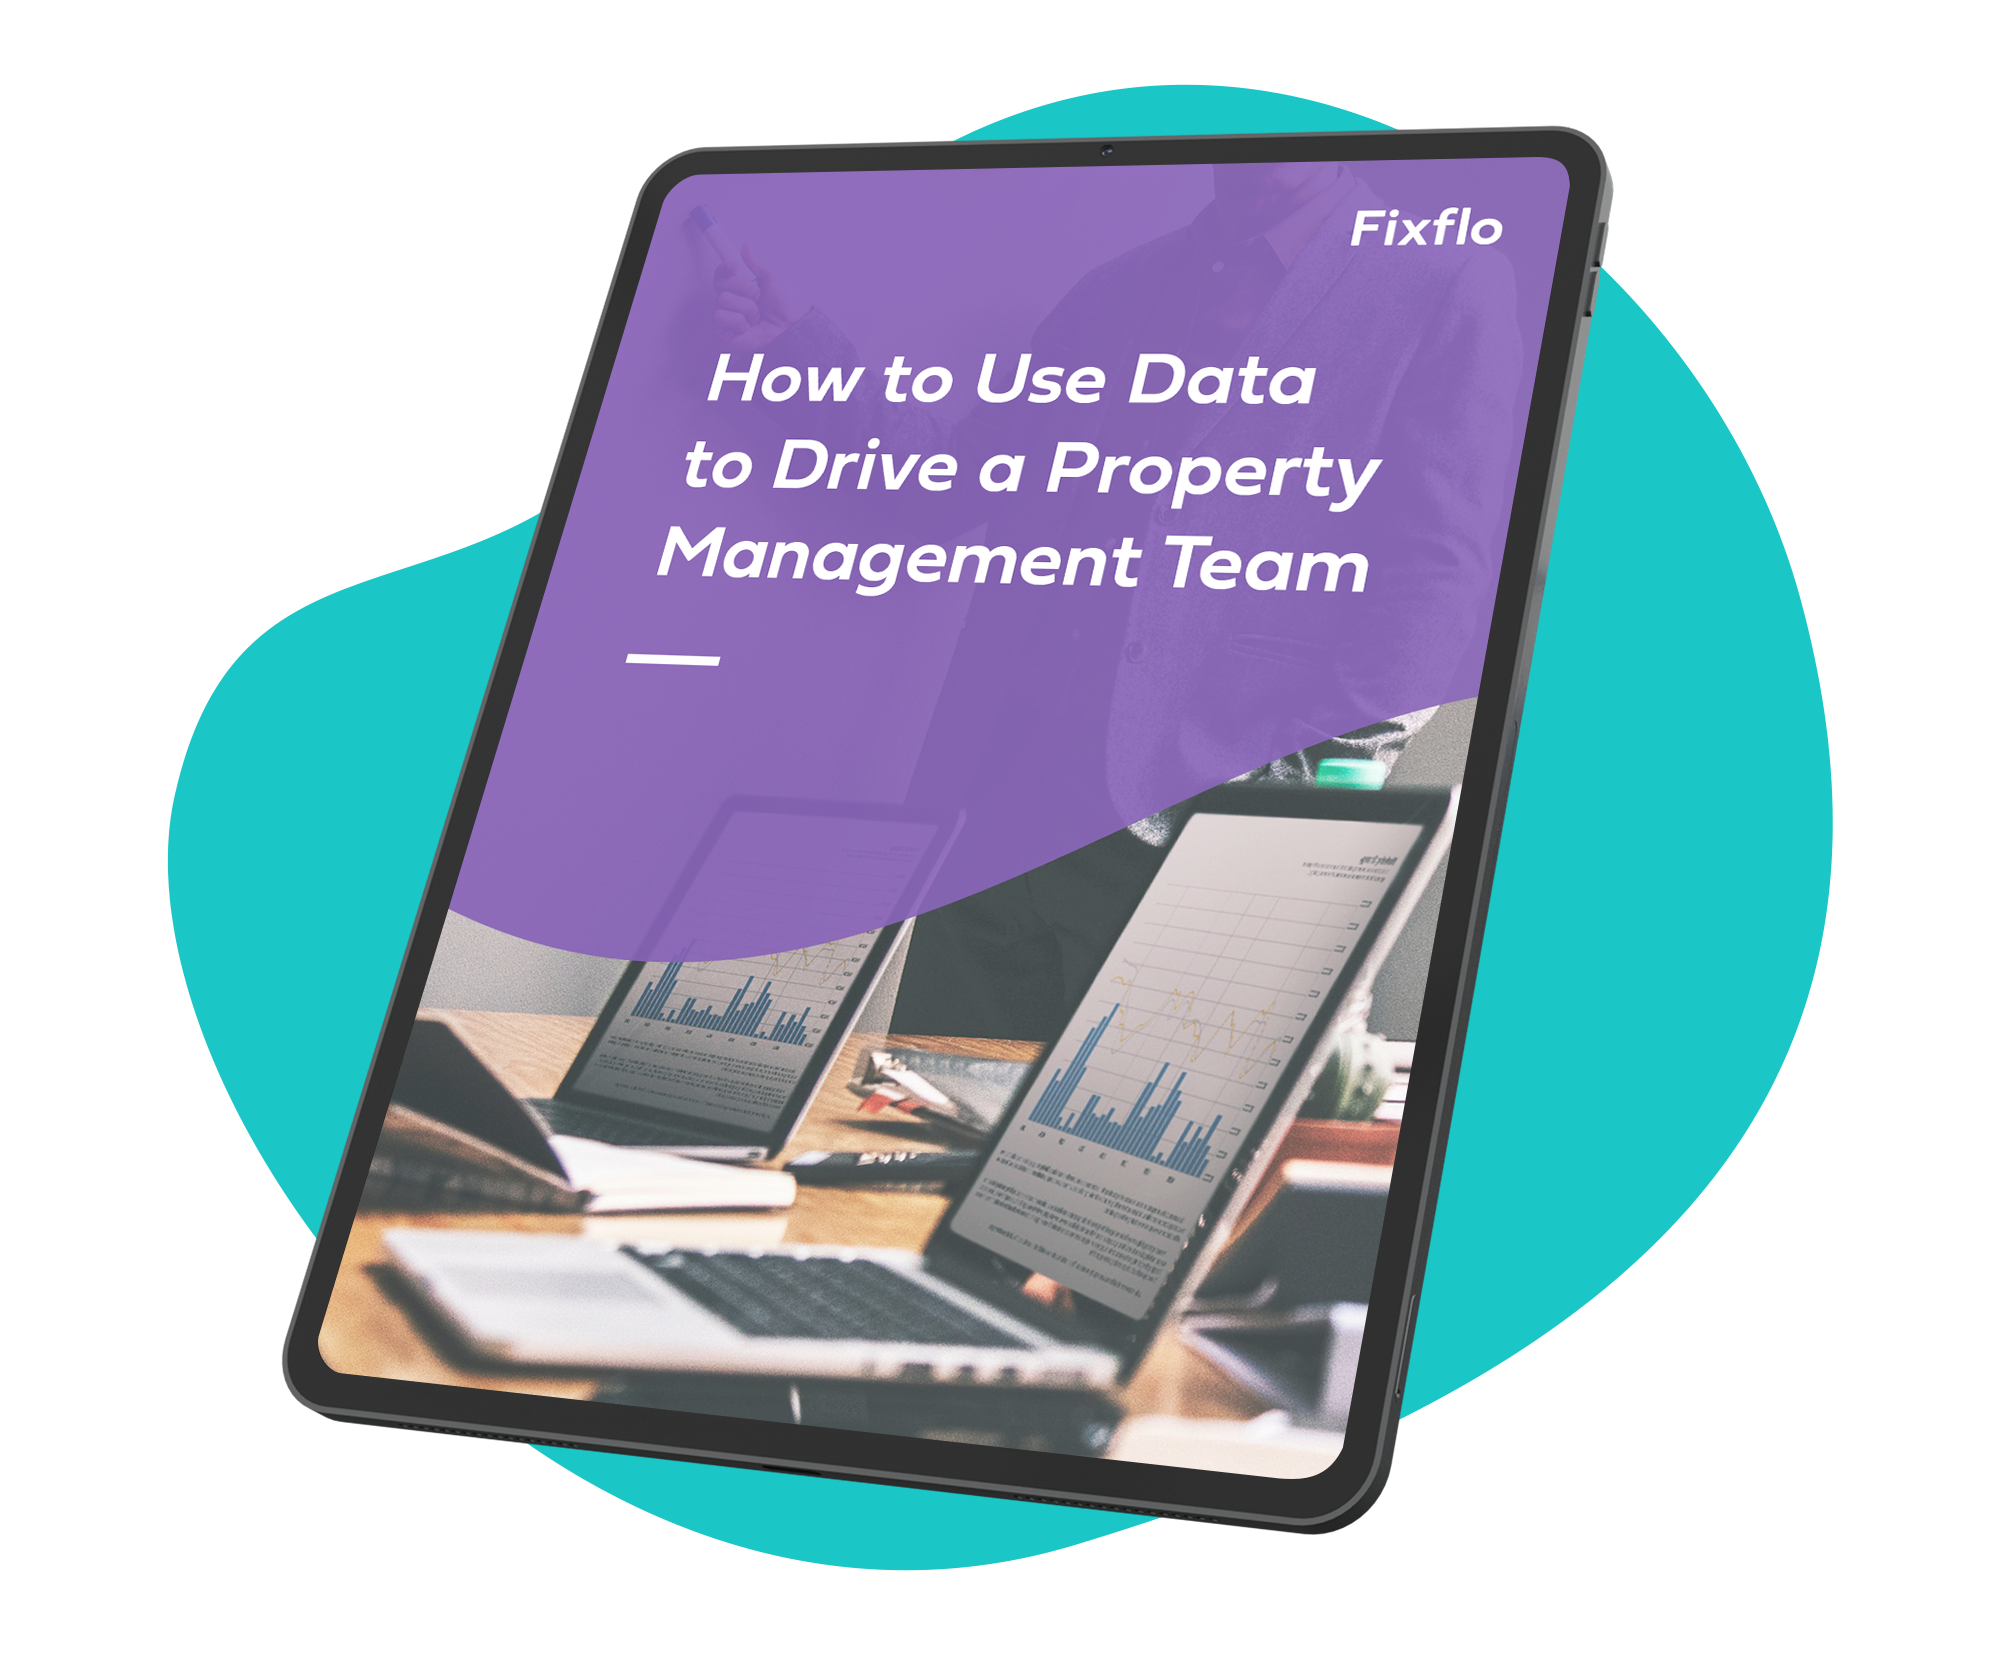 Fixflo's How to Use Data to Drive a Property Management Team eBook